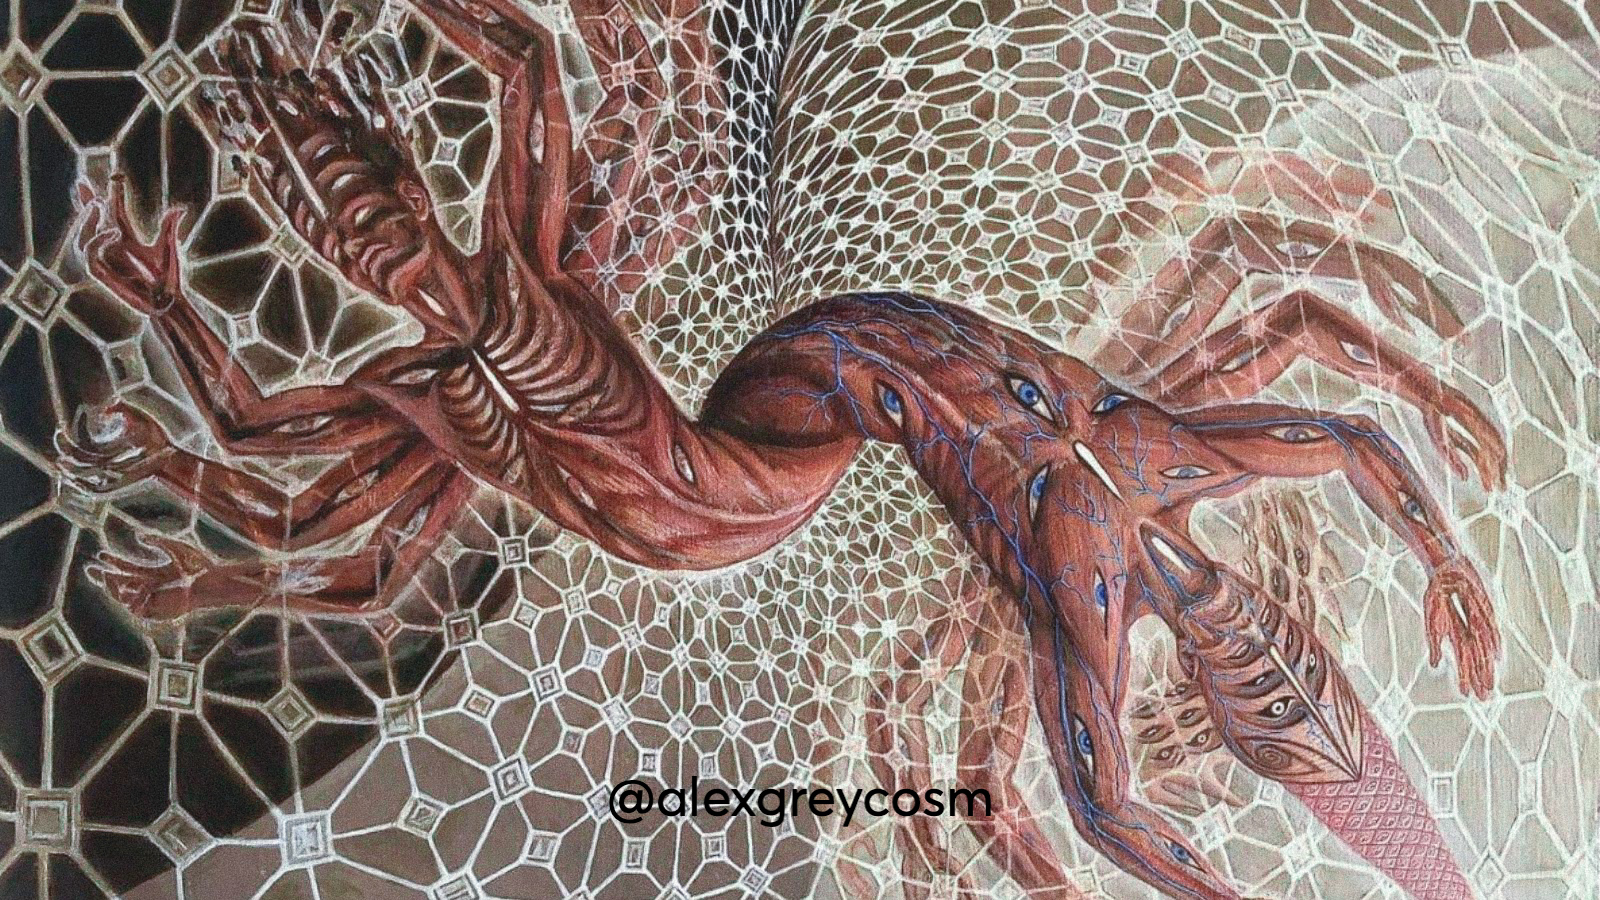 An artwork created by Alex Grey depicting the psychedelic experience.